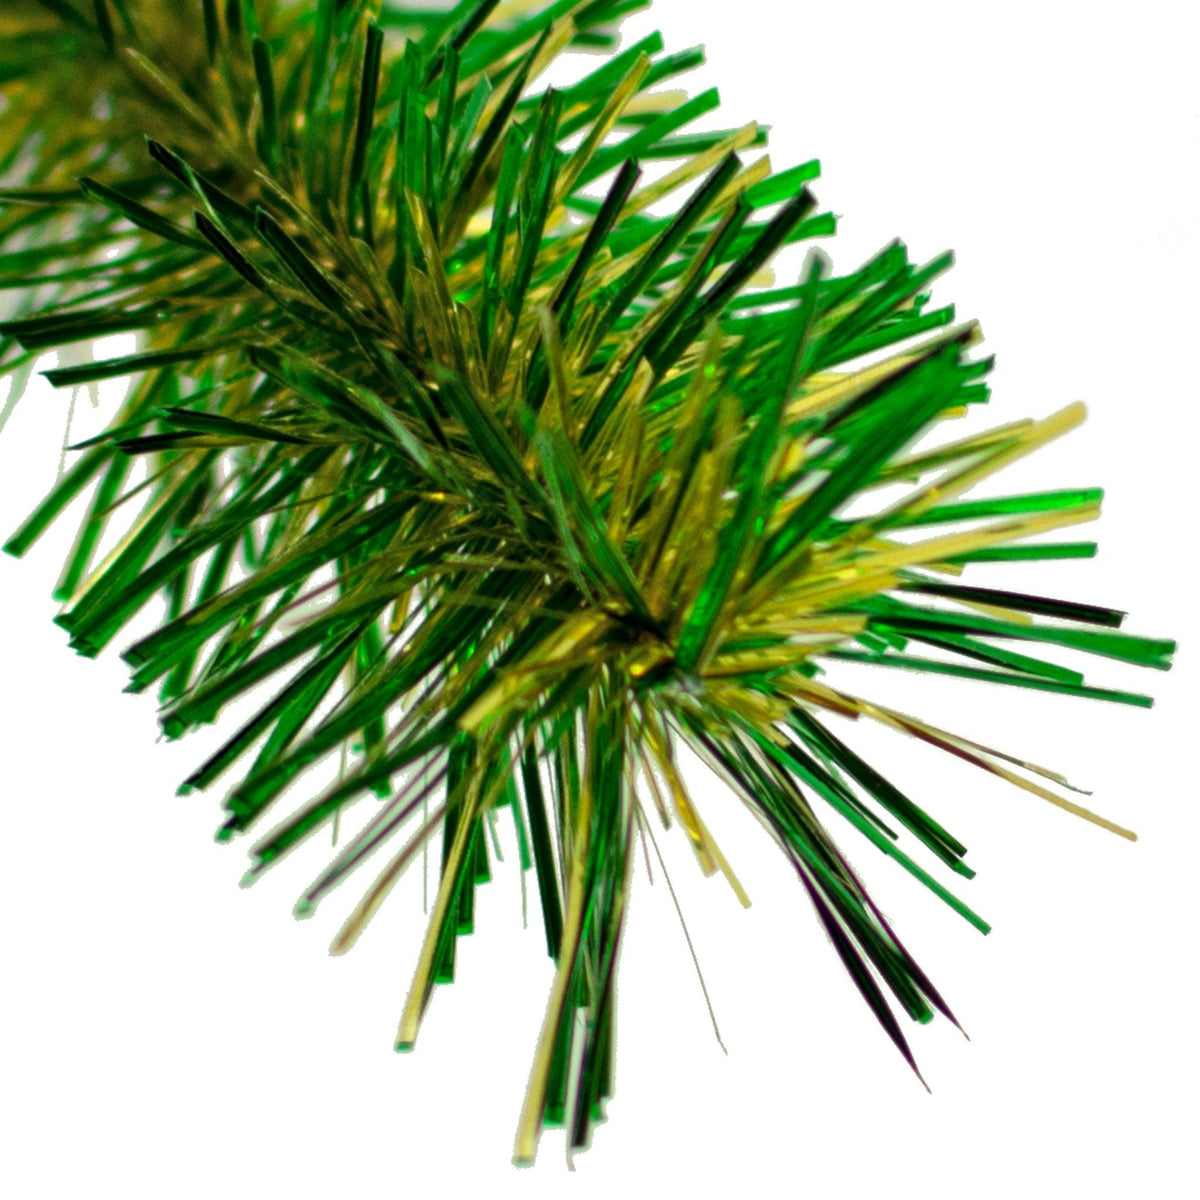 Lee Display's brand new 25ft Shiny Metallic Green and Gold St. Patrick's Day themed Tinsel Garlands and Fringe Embellishments on sale at leedisplay.com